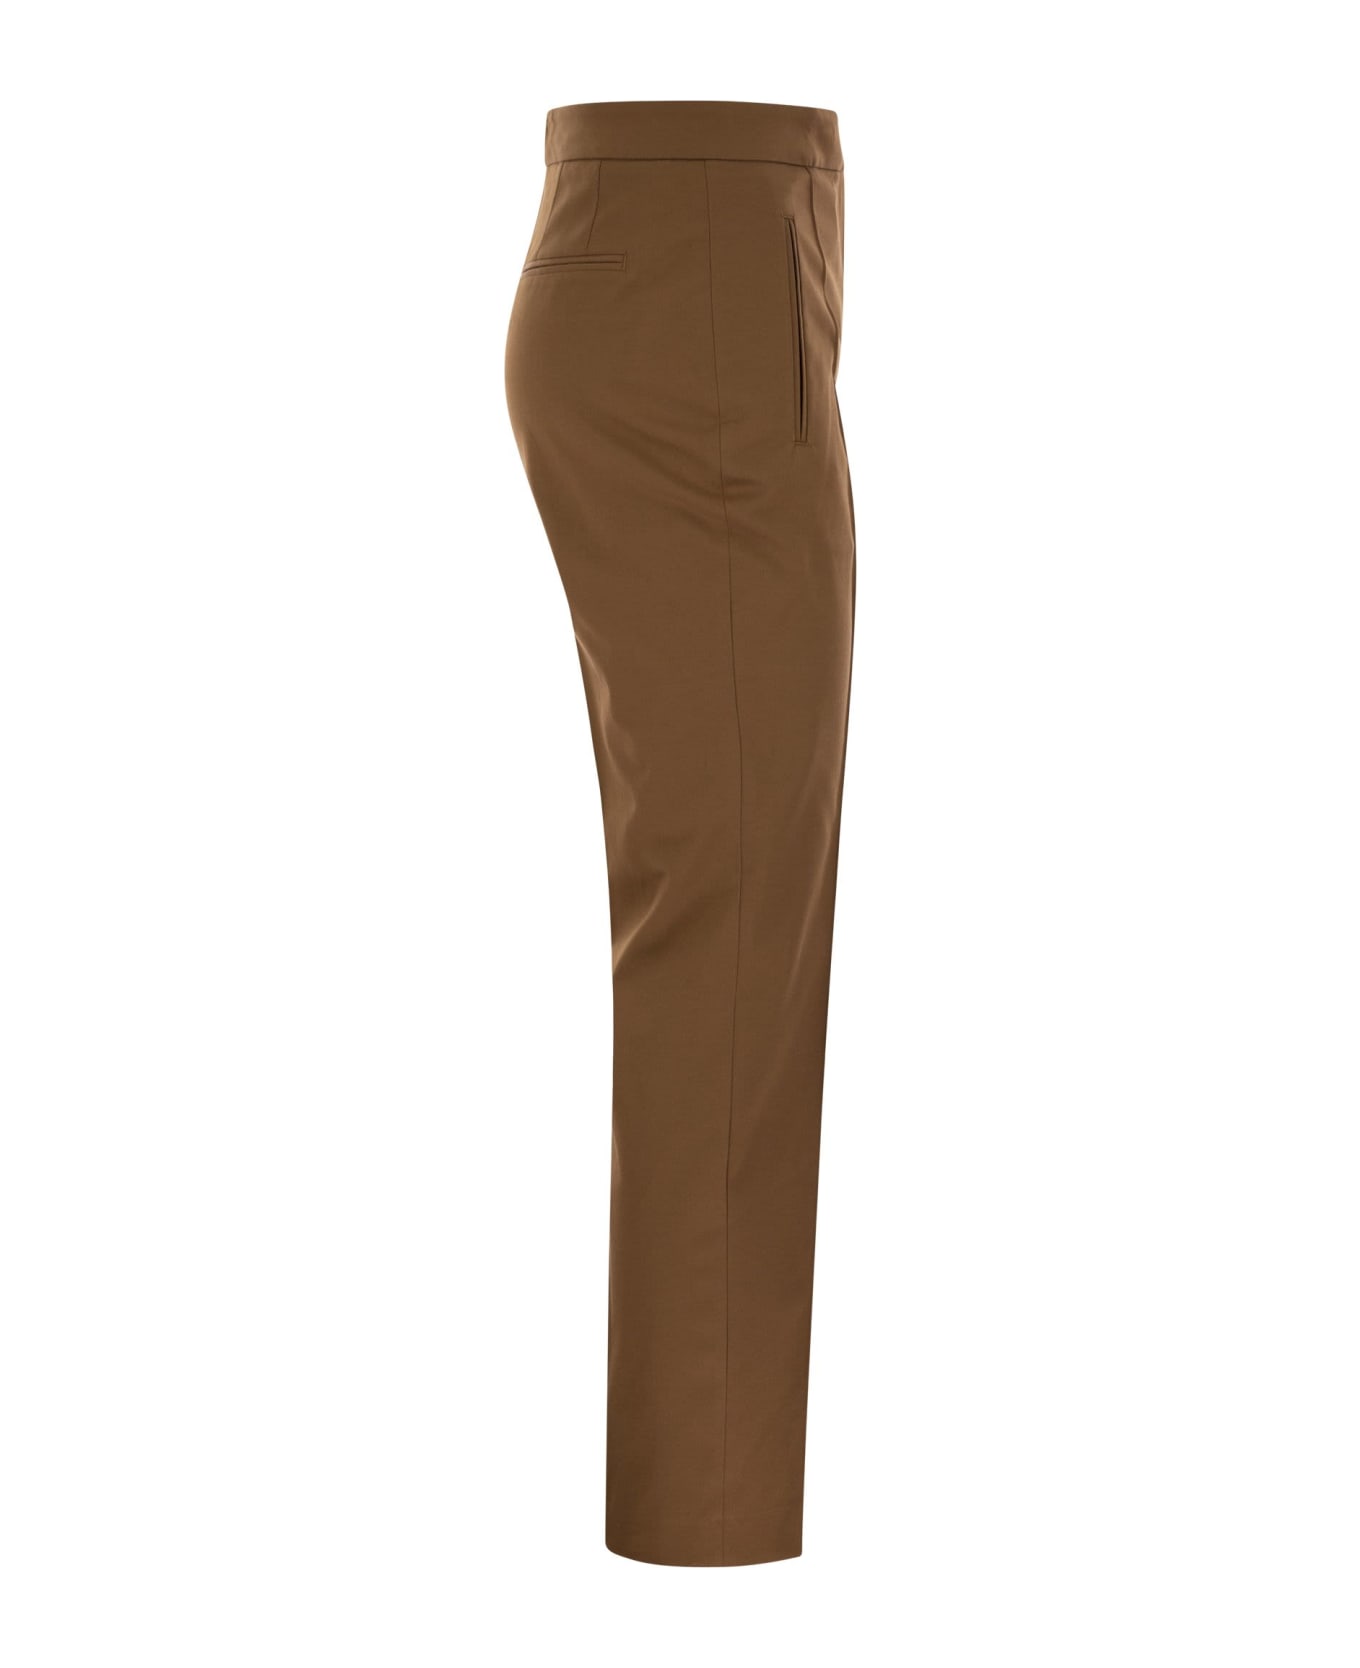 PT Torino Frida - Cotton And Silk Trousers With Pleat - Brown ボトムス